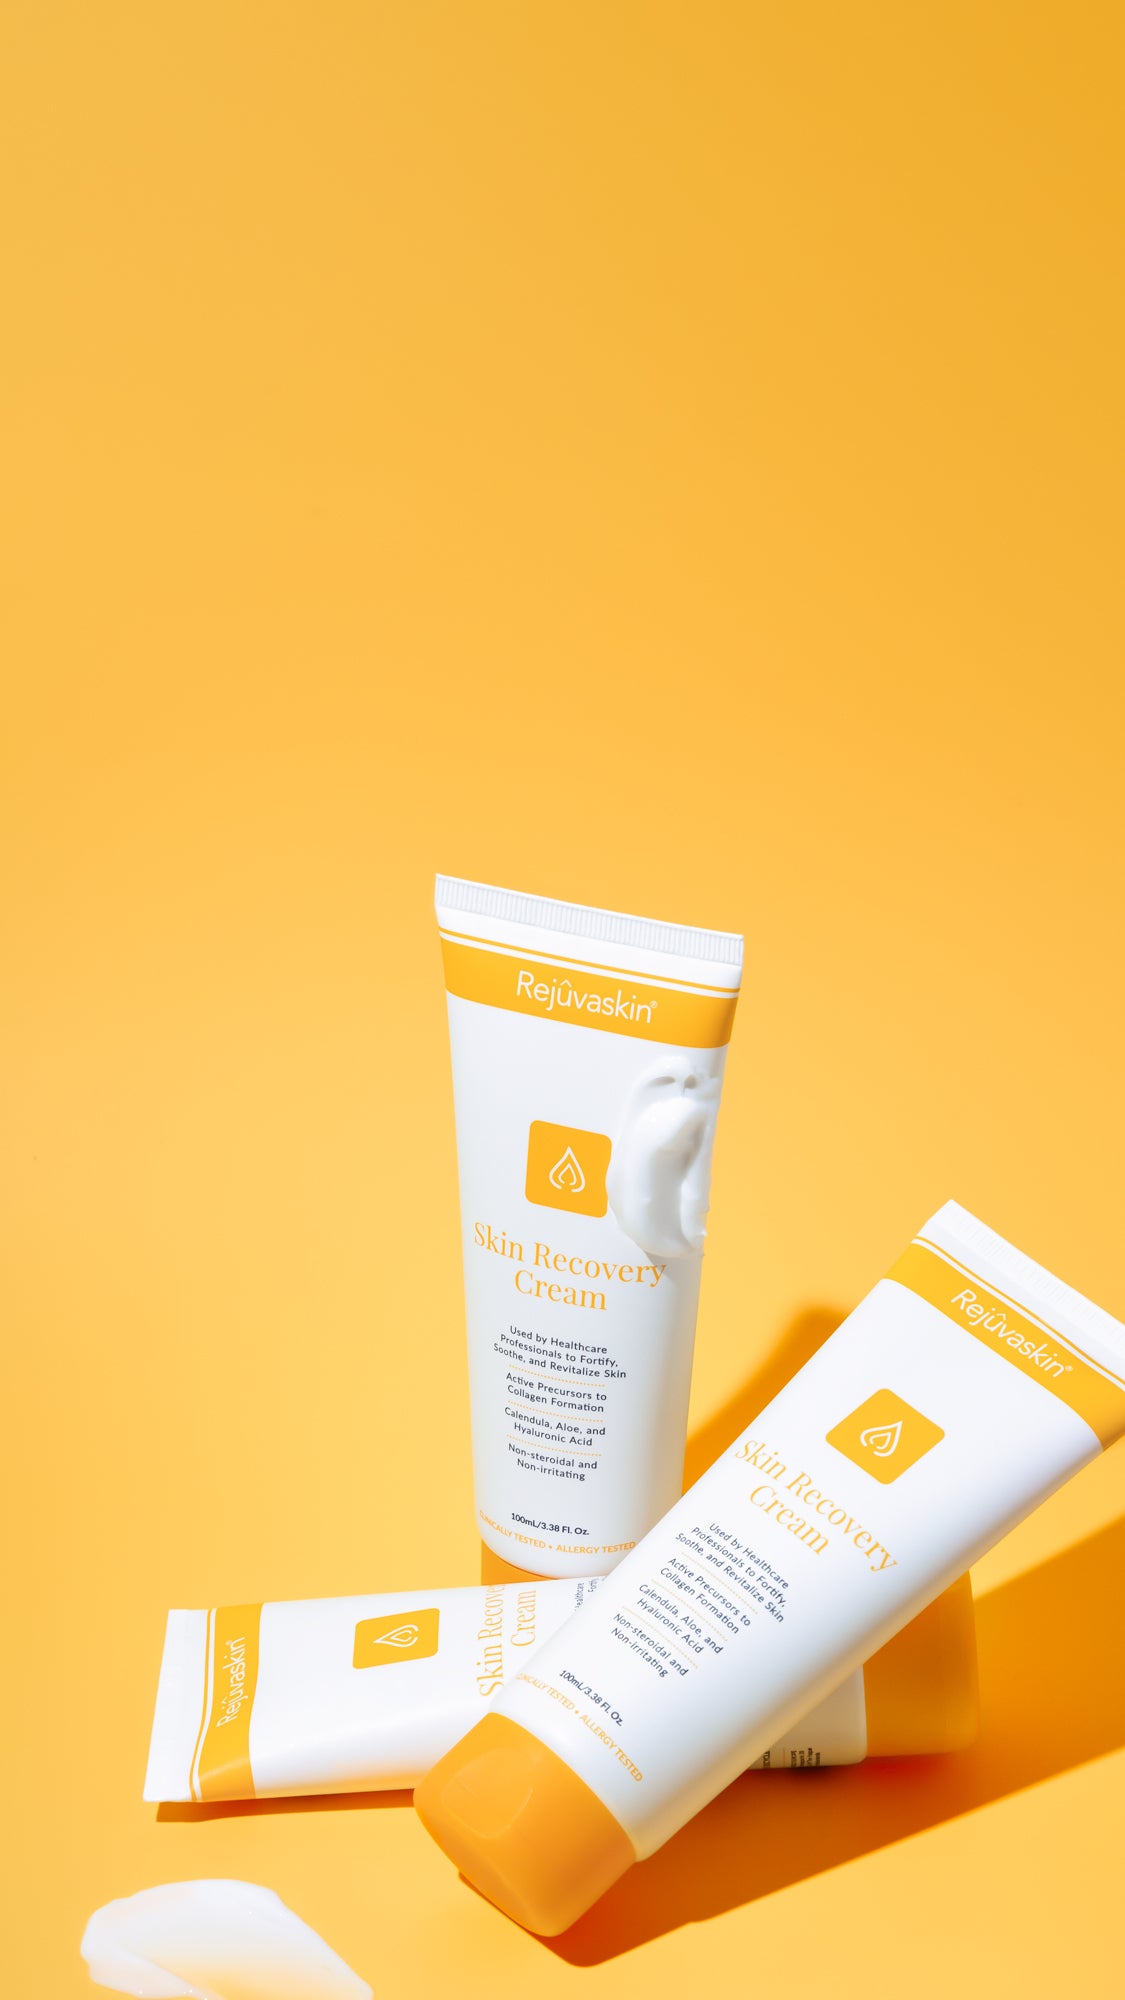 Buy 2, Get 3rd FREE Skin Recovery Cream